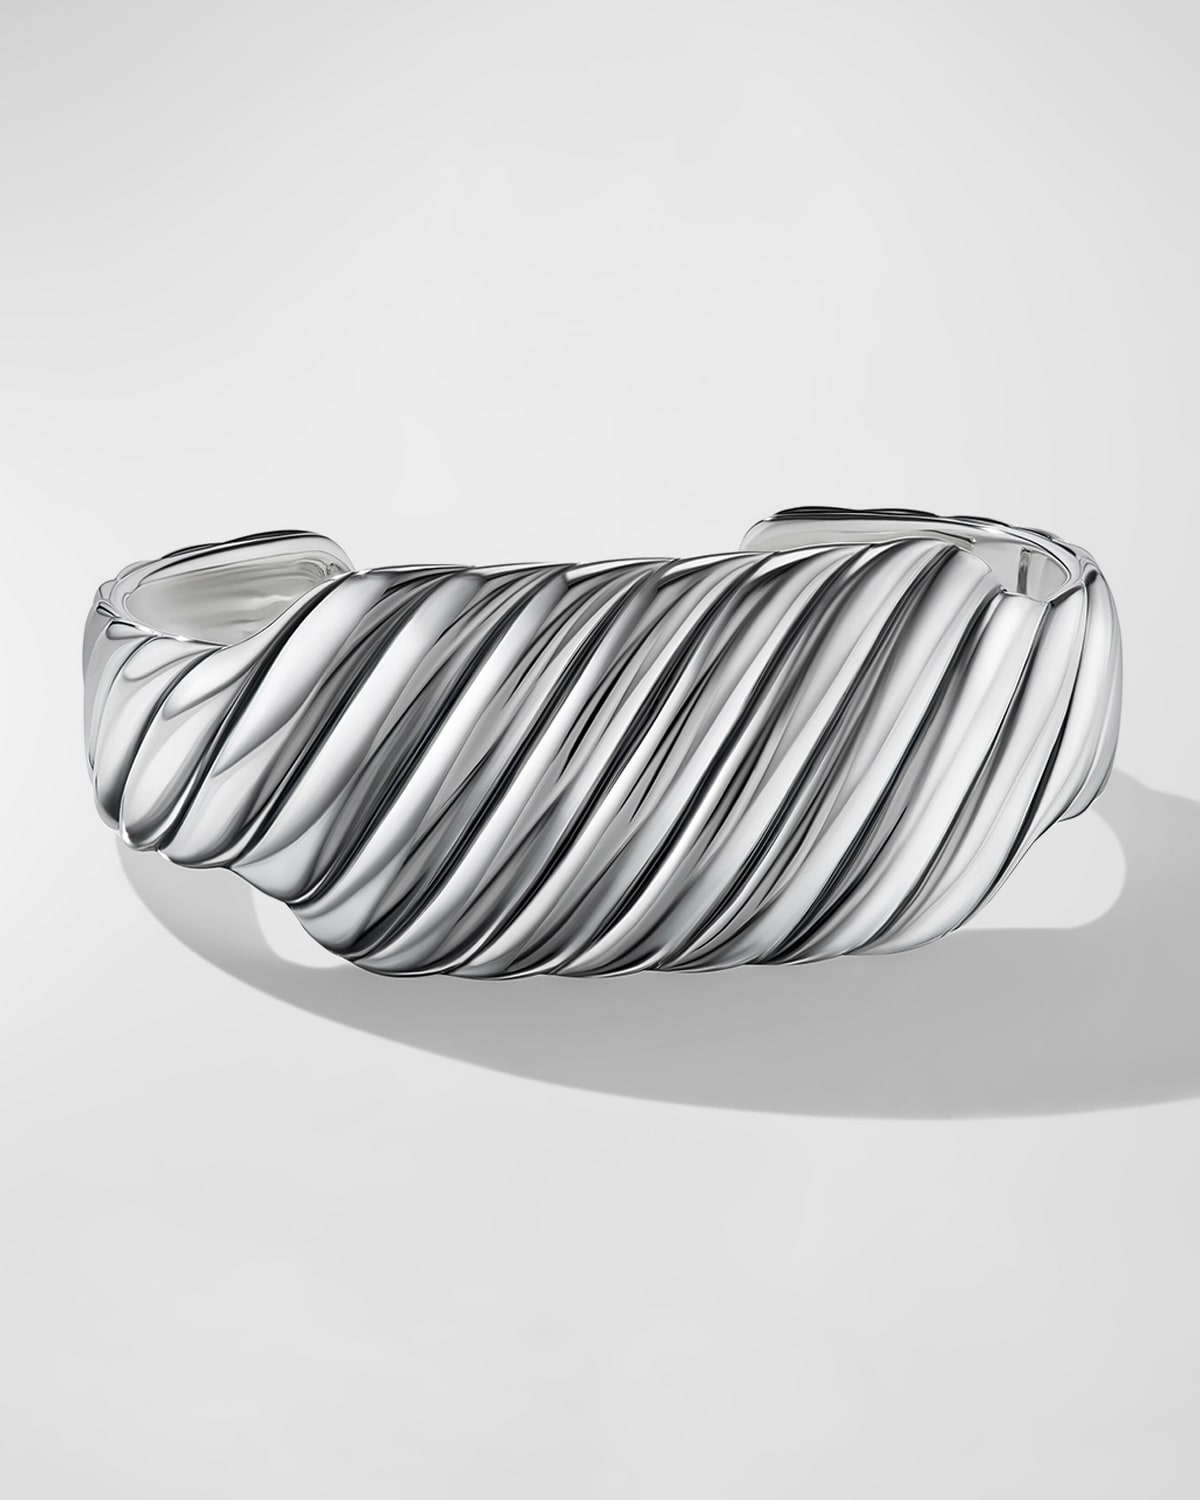 Sculpted Cable Contour Cuff Bracelet in Silver, 26mm